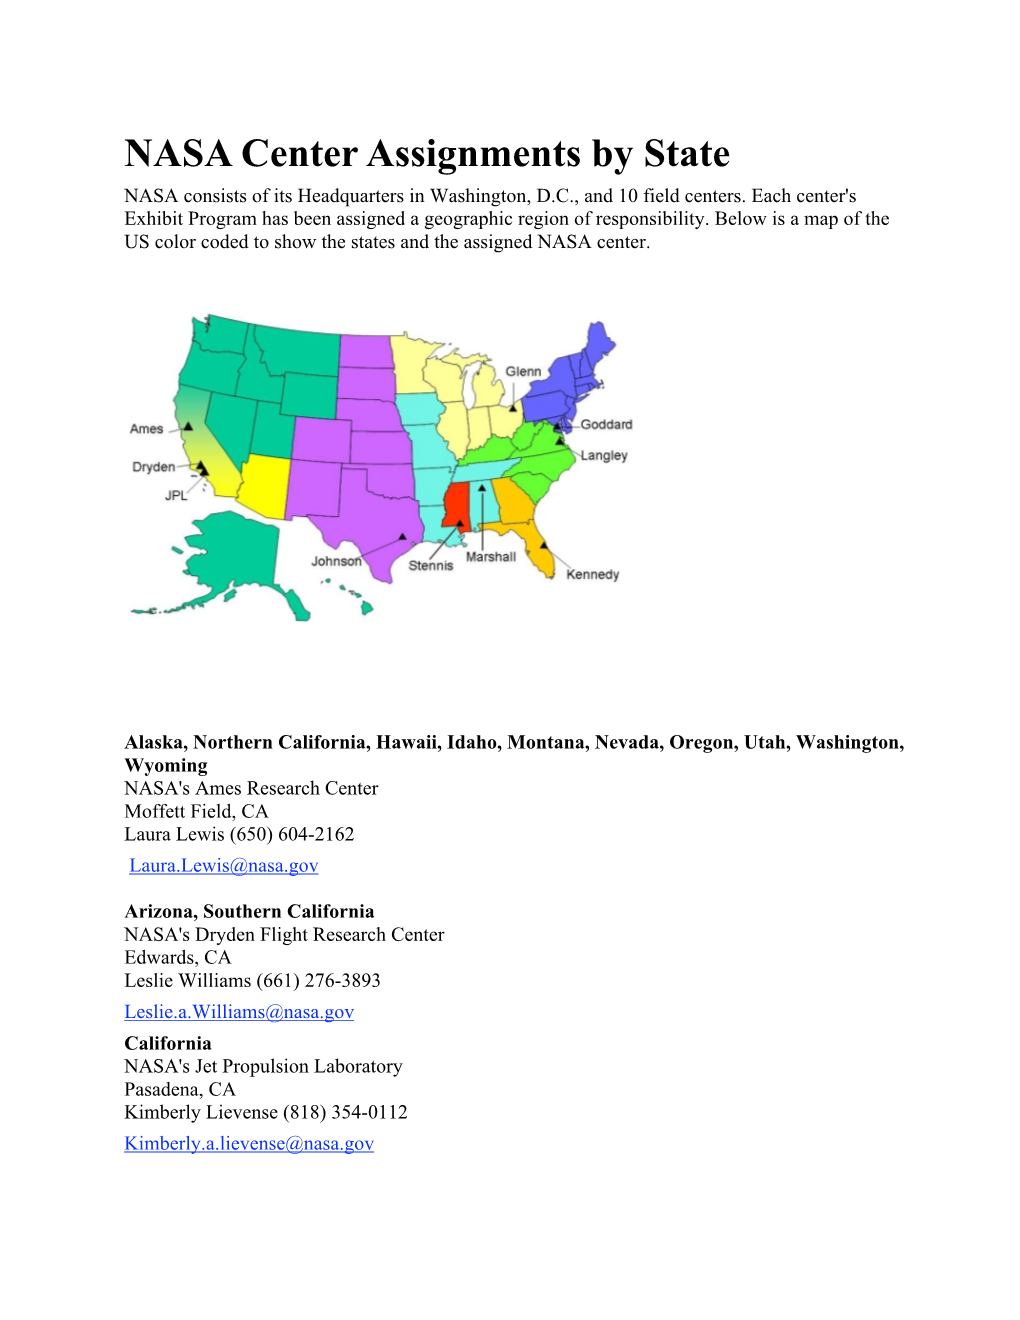 NASA Center Assignments by State NASA Consists of Its Headquarters in Washington, D.C., and 10 Field Centers